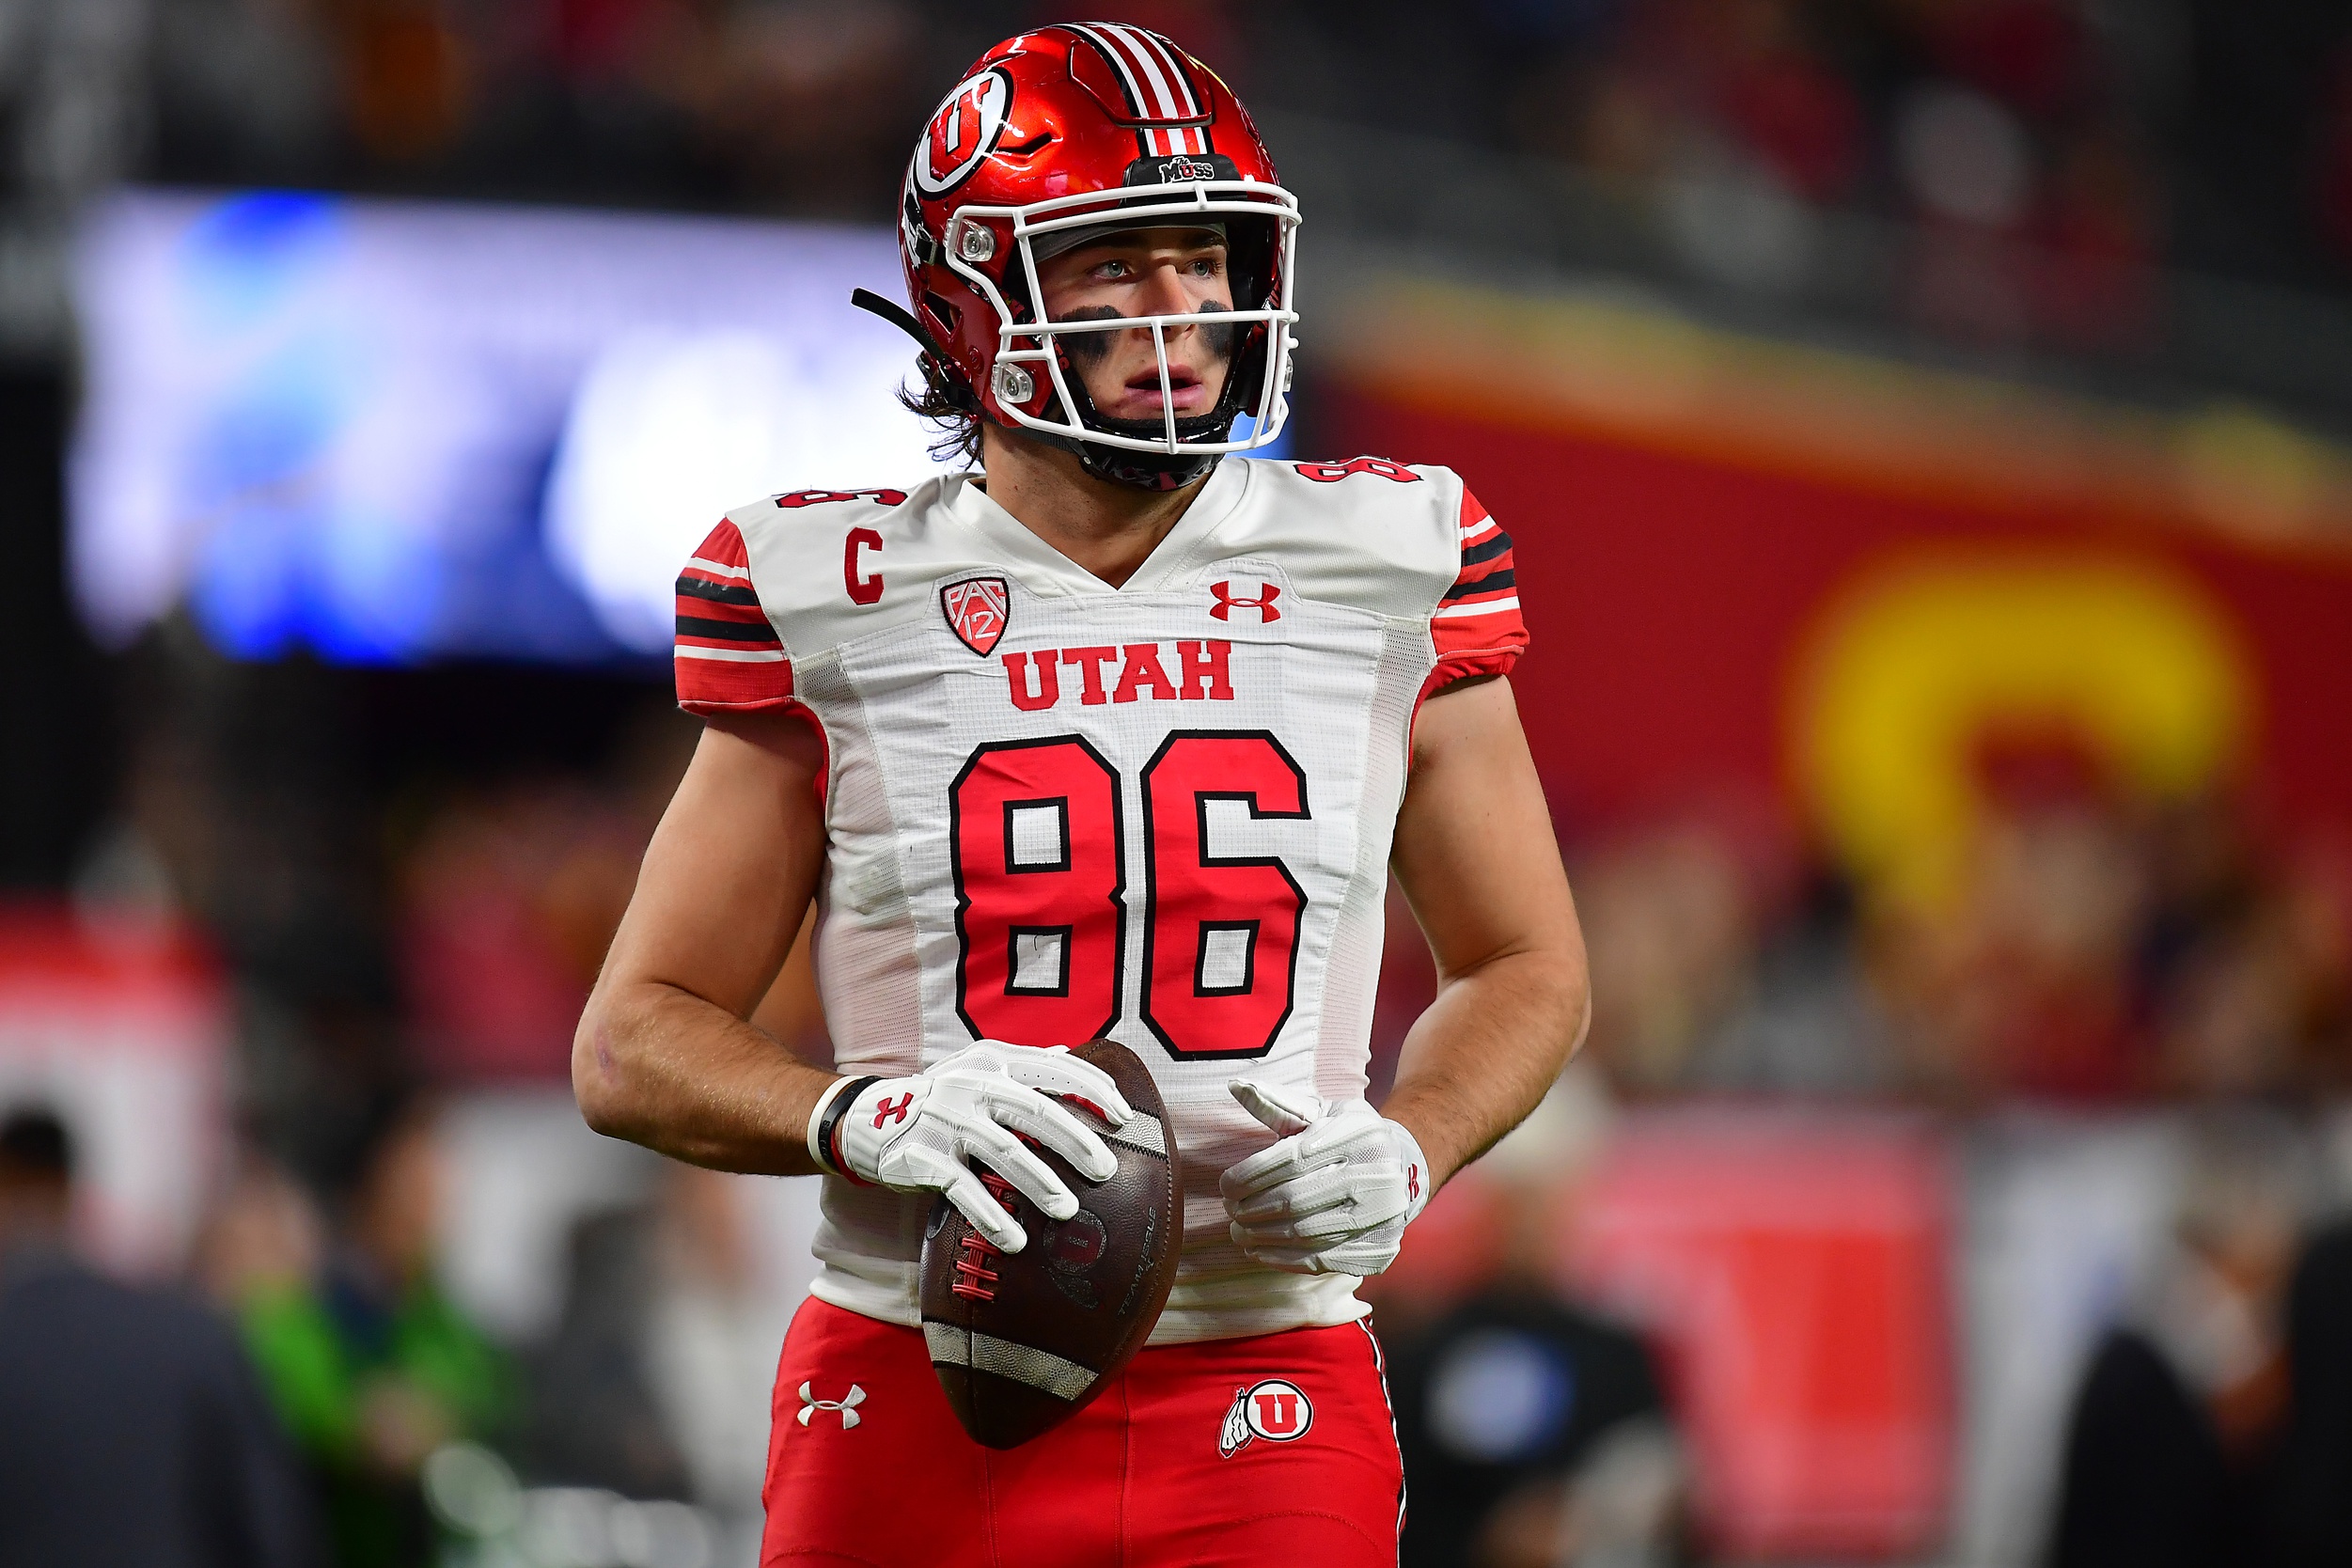 Giants: 3 sleeper prospects to target in 2023 NFL Draft